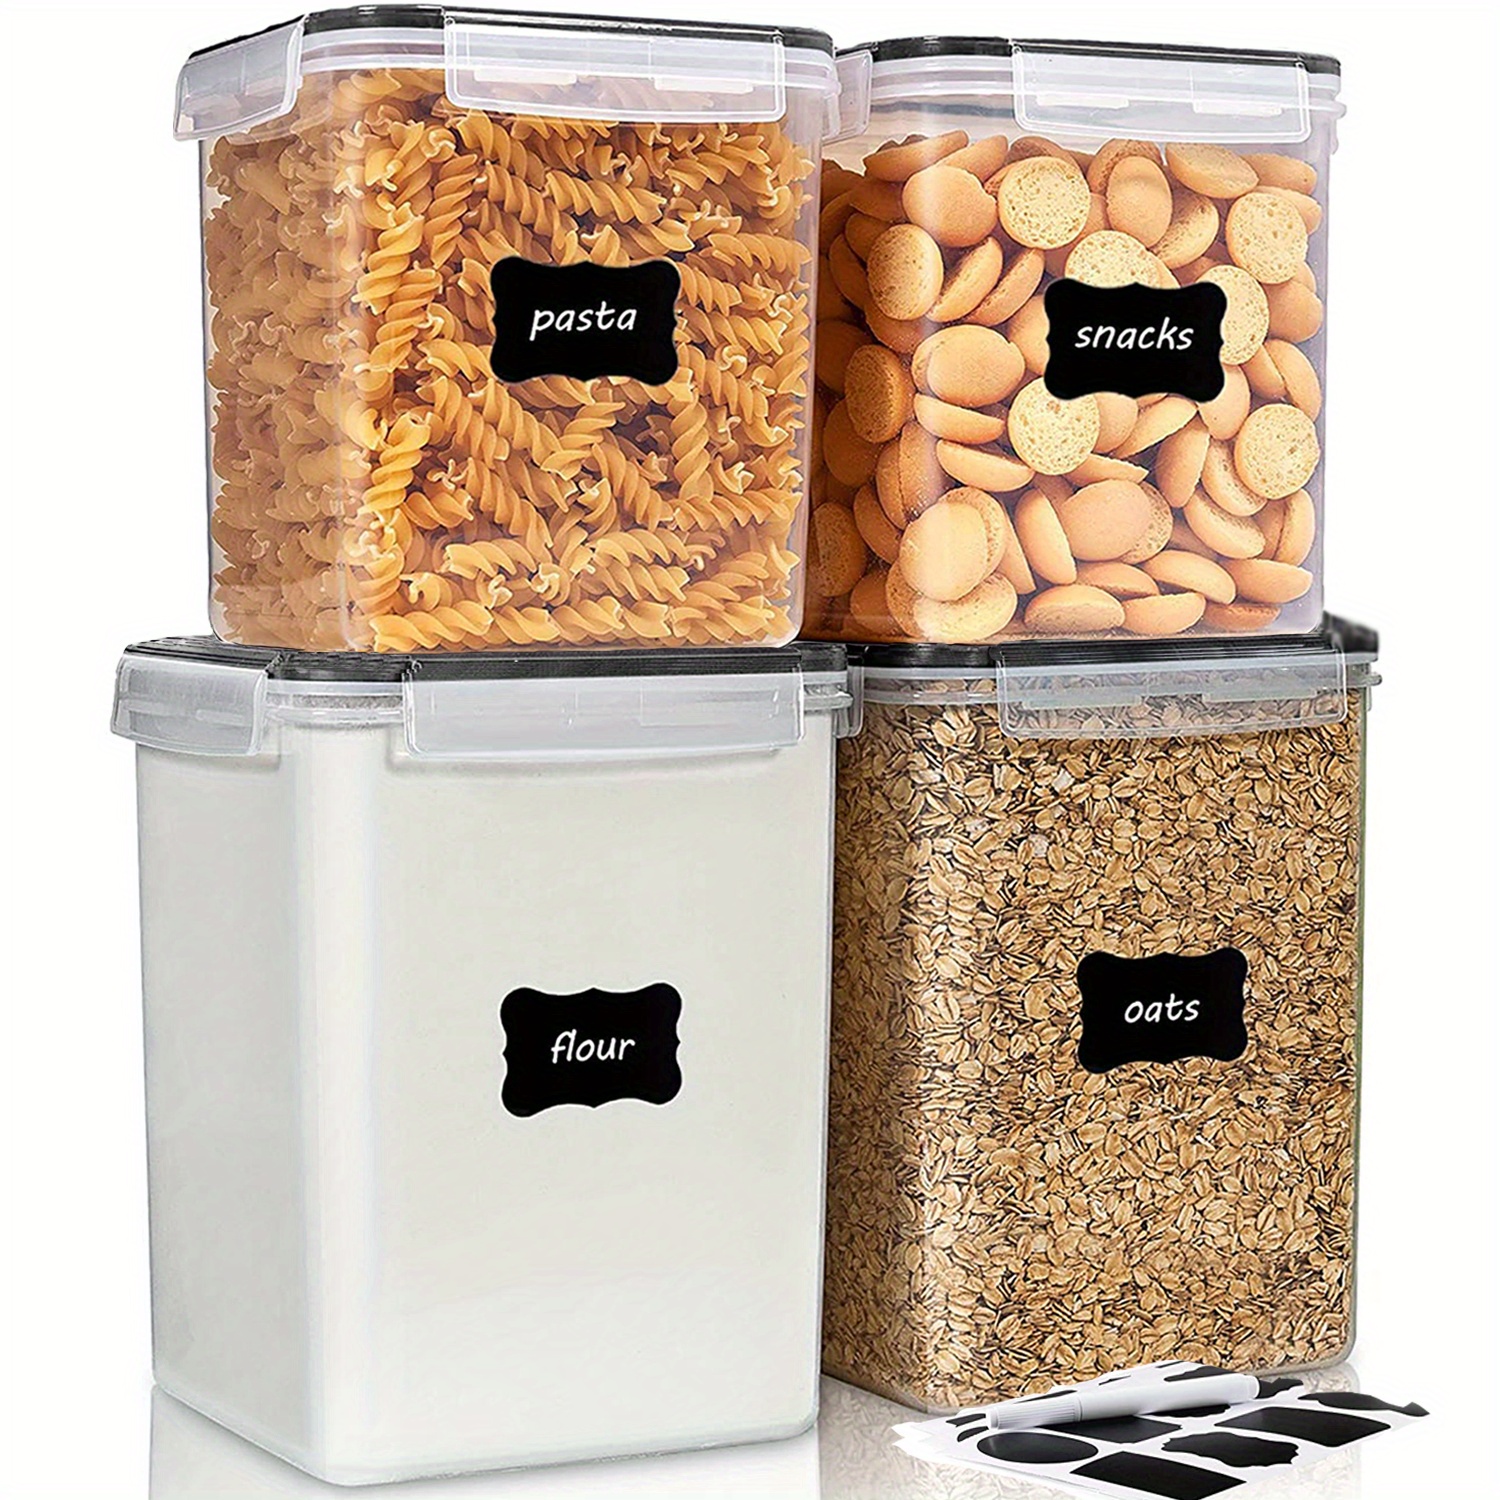  Shazo Airtight Food Storage Containers 12 PC Set, Kitchen  Pantry Organization Plastic Containers + Labels +Marker BPA FREE for Sugar,  Rice, Cereal, Flour + Interchangeable Lids: Home & Kitchen